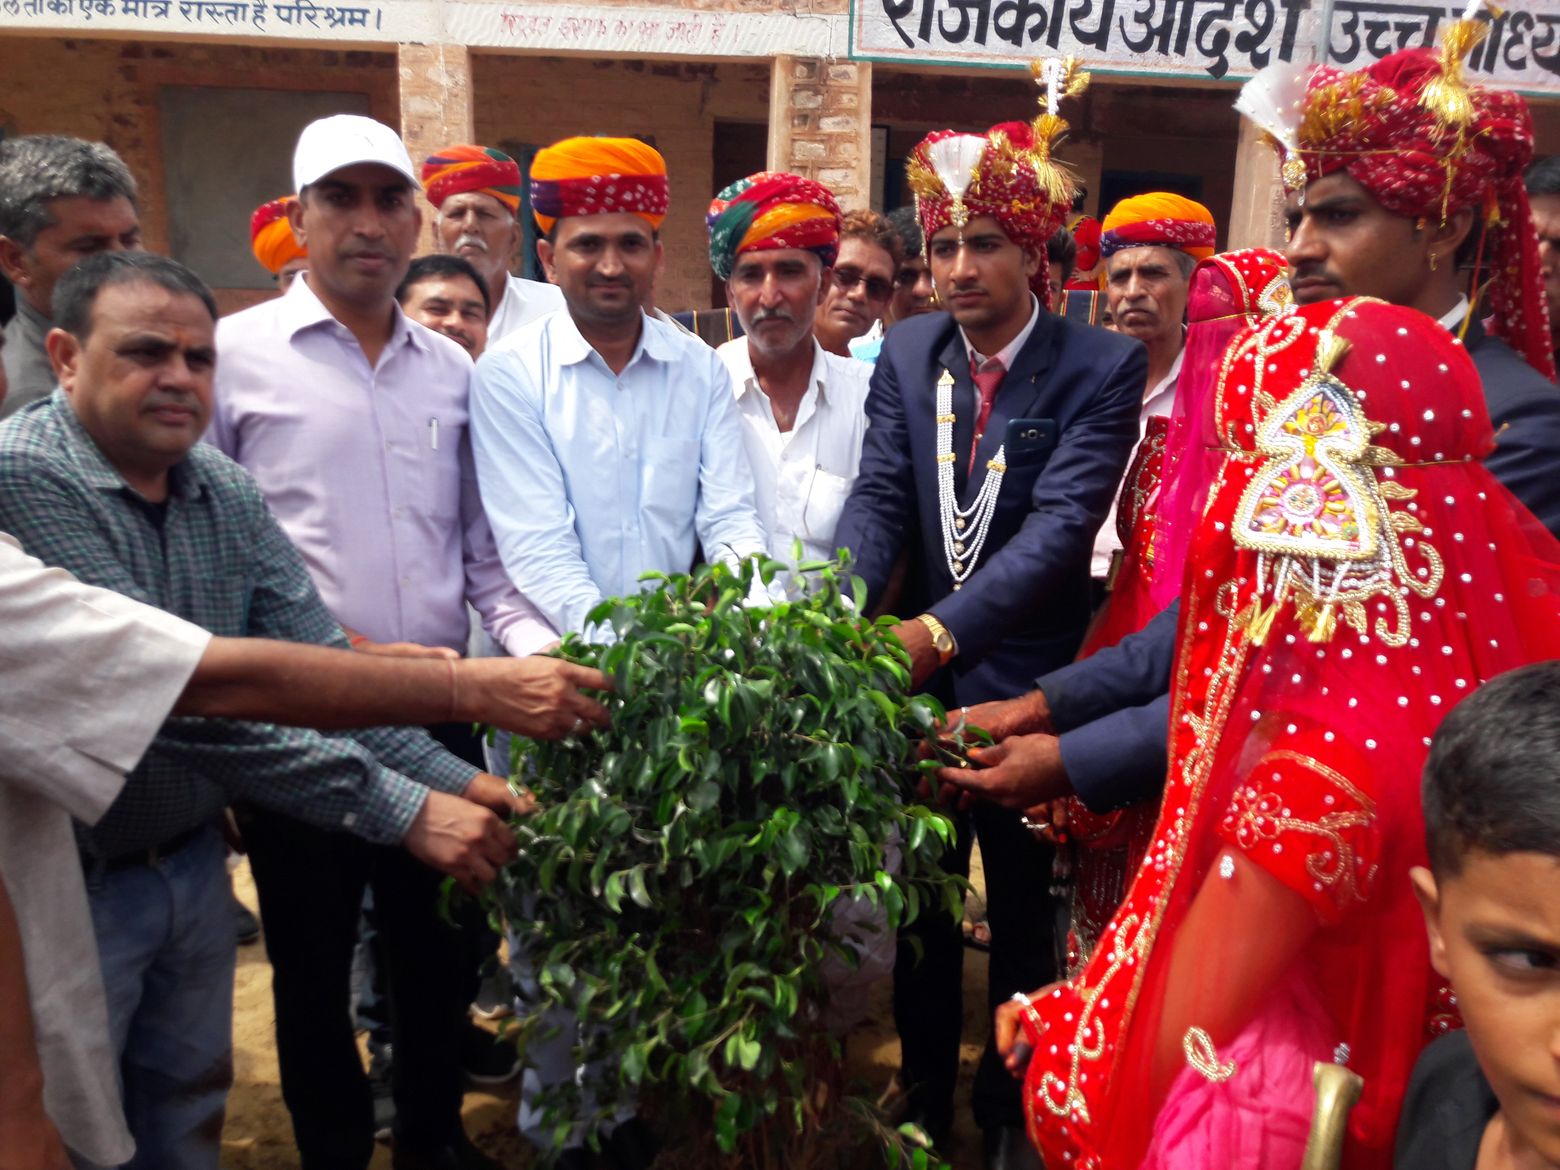 Two newly married couples planted plantation in Rohini